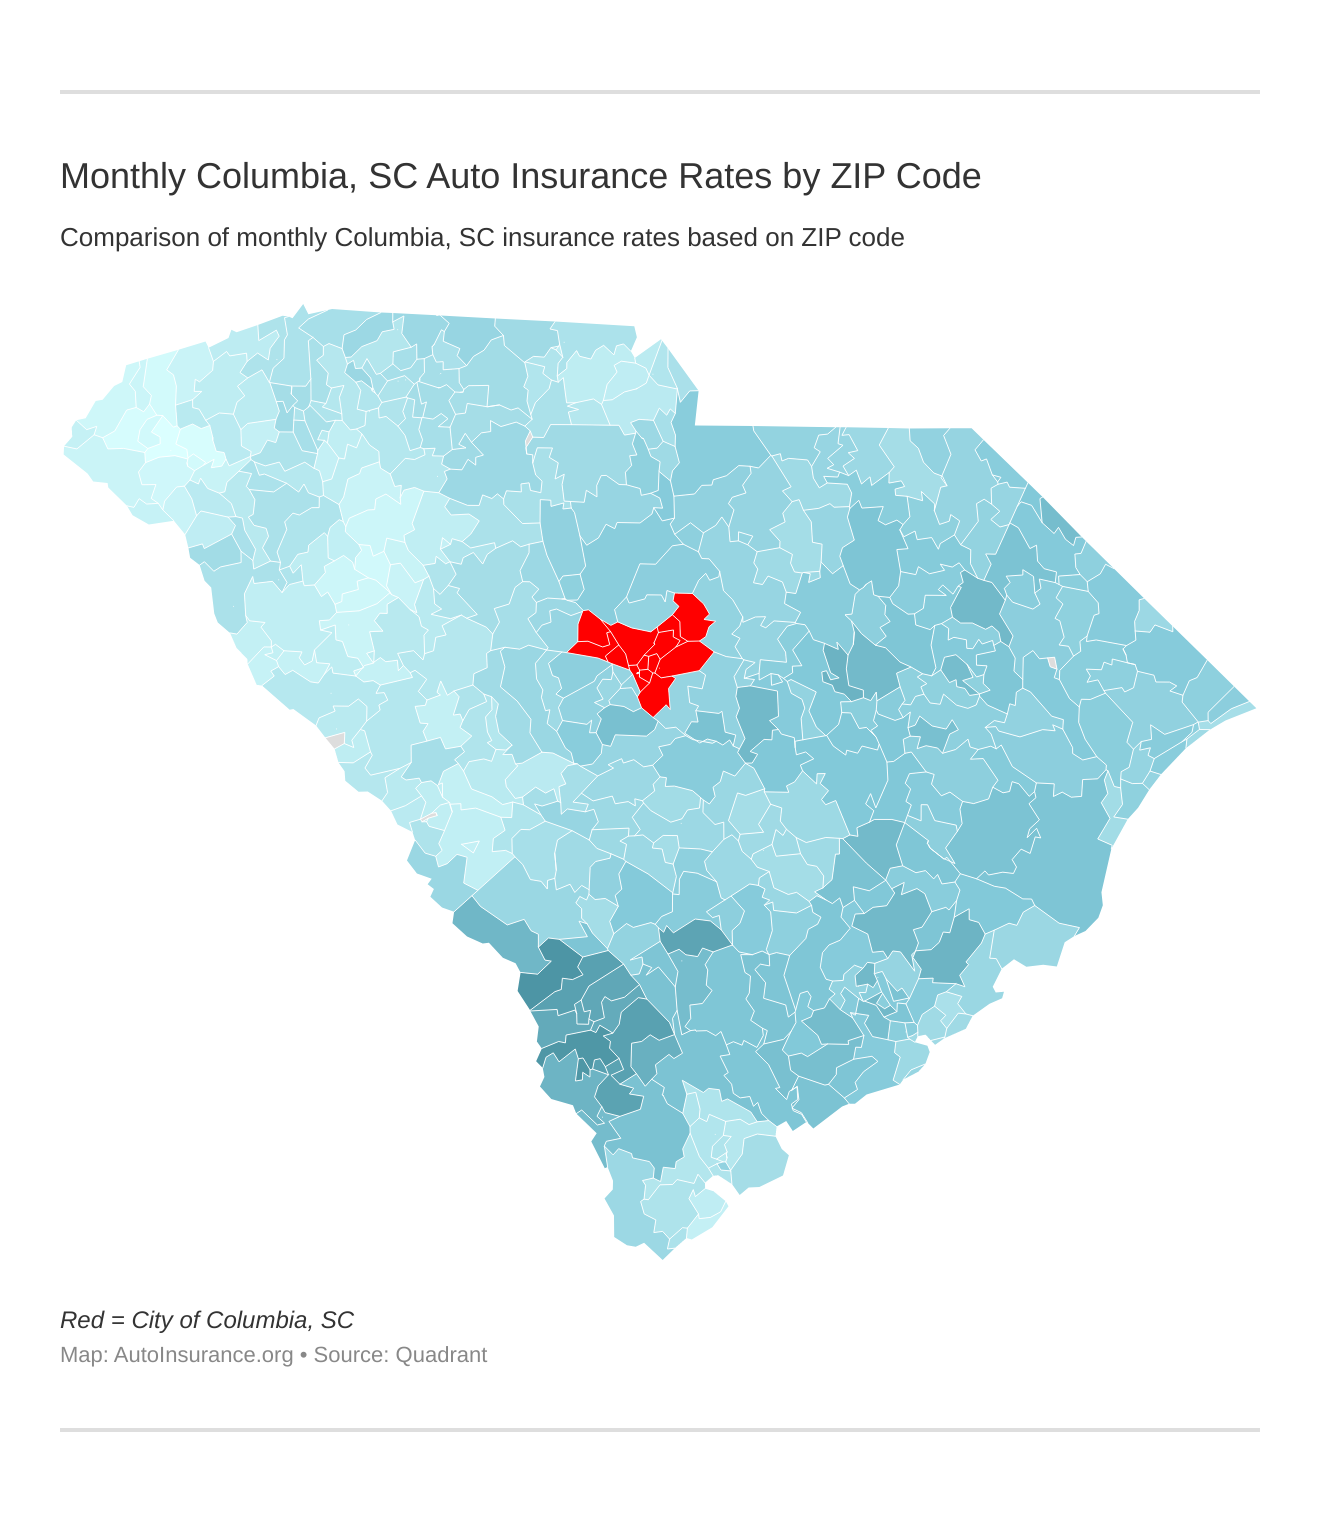 Monthly Columbia, SC Auto Insurance Rates by ZIP Code